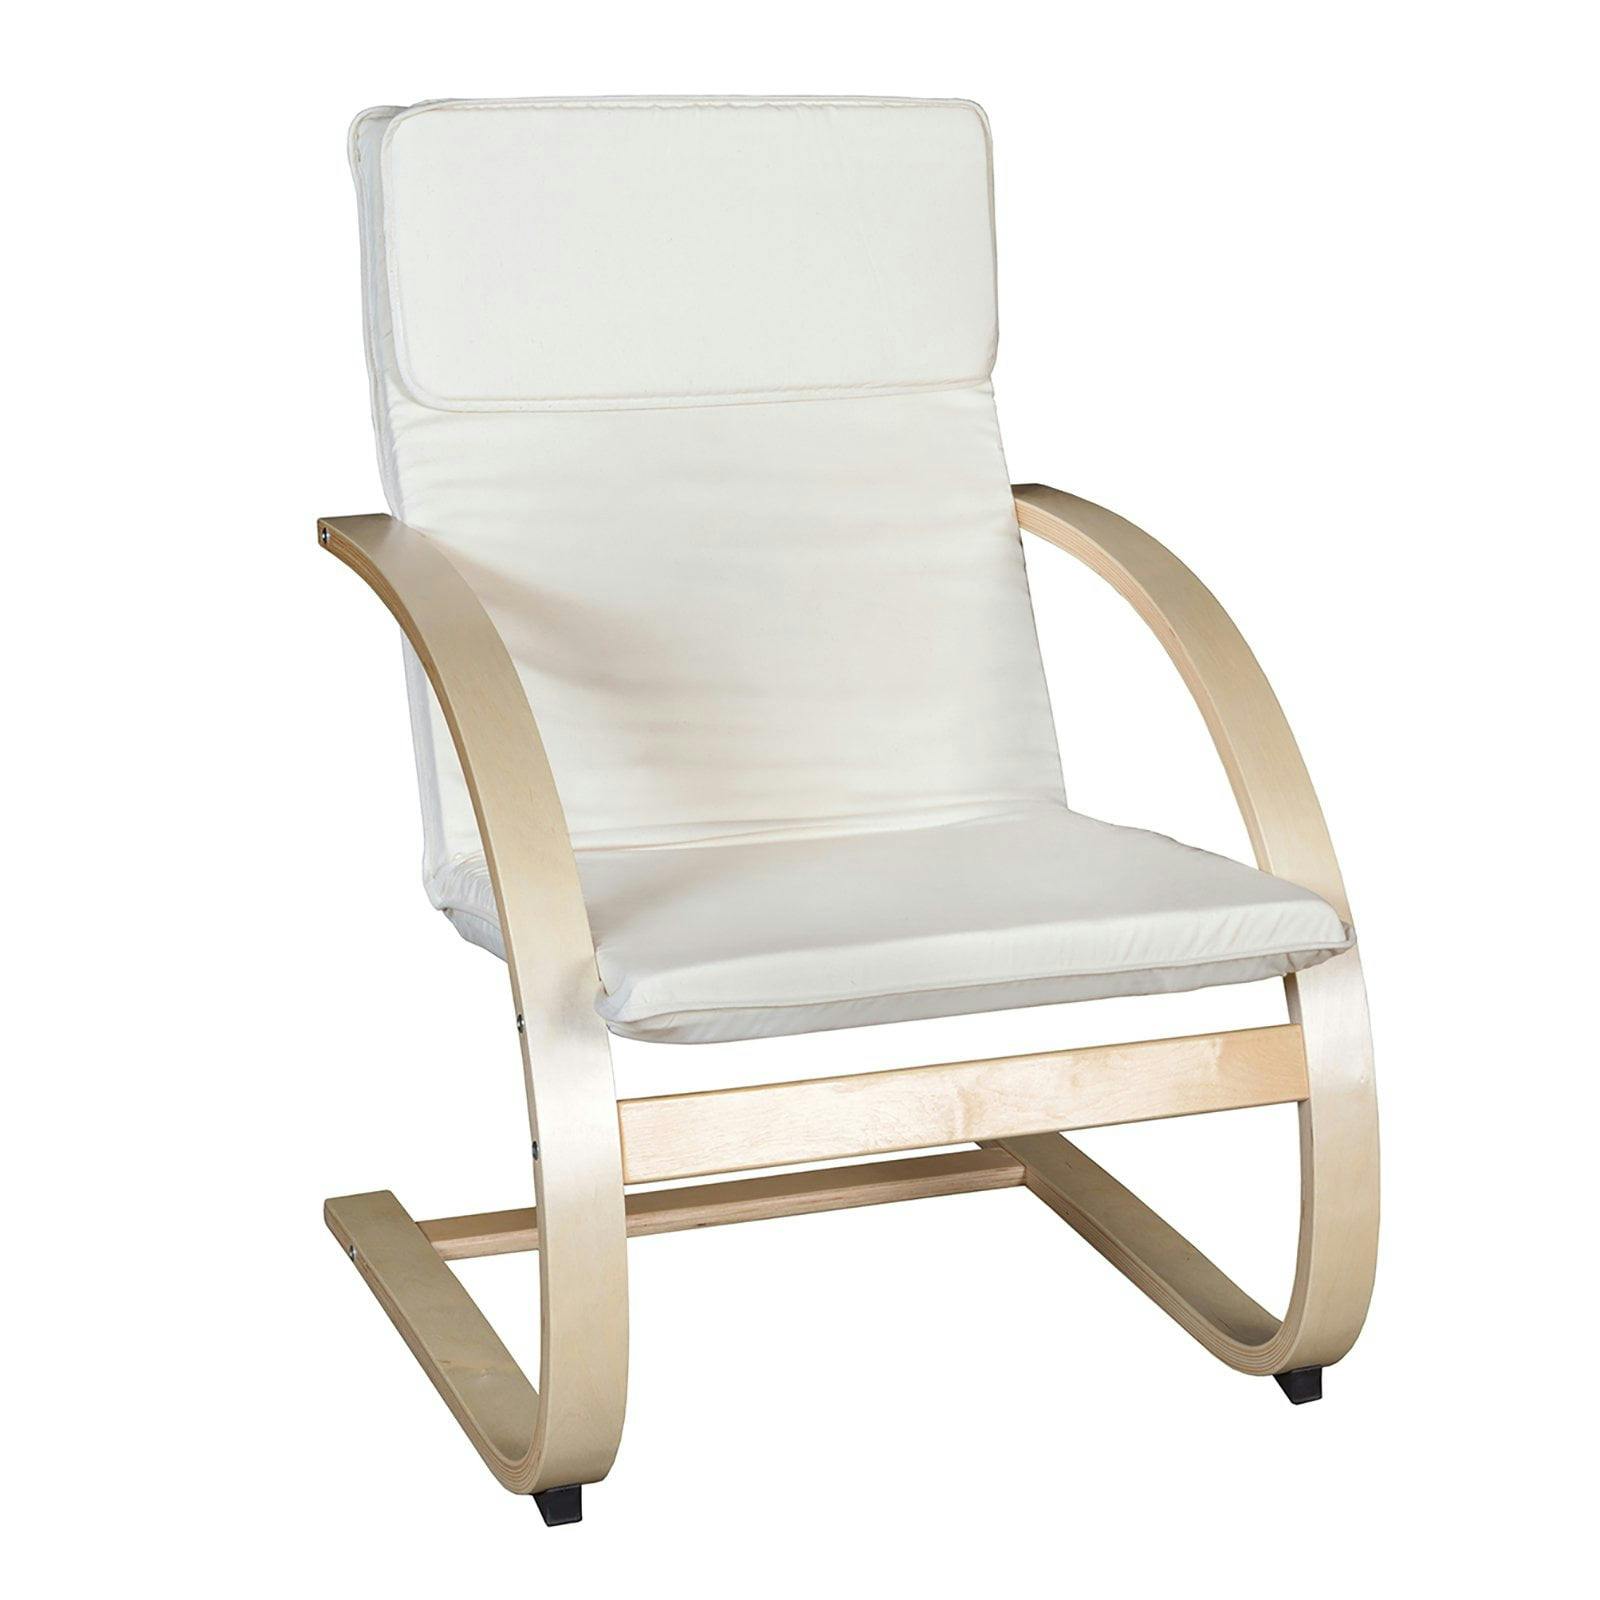 Mocha Walnut & Beige Cotton Recliner with Removable Cover